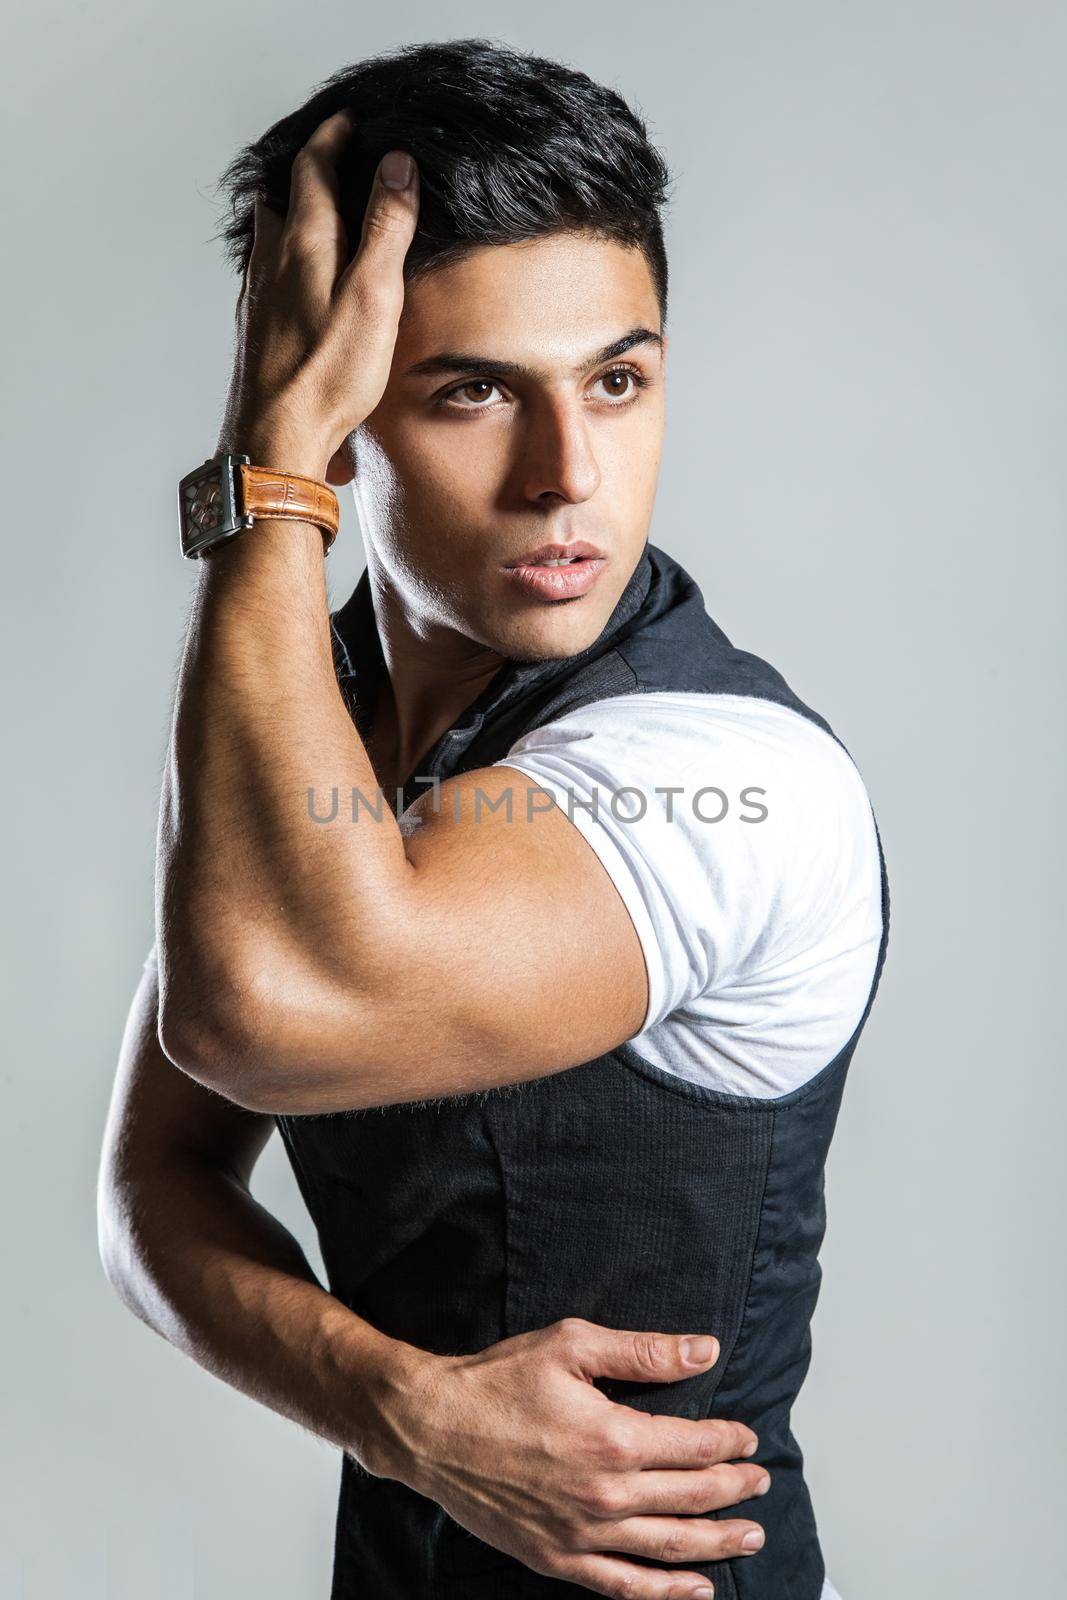 Portrait of fashionable attractive man wearing white T-shirt and black jacket, keeping hand on head, looking away with confident expression. Indoor studio shot isolated on gray background.